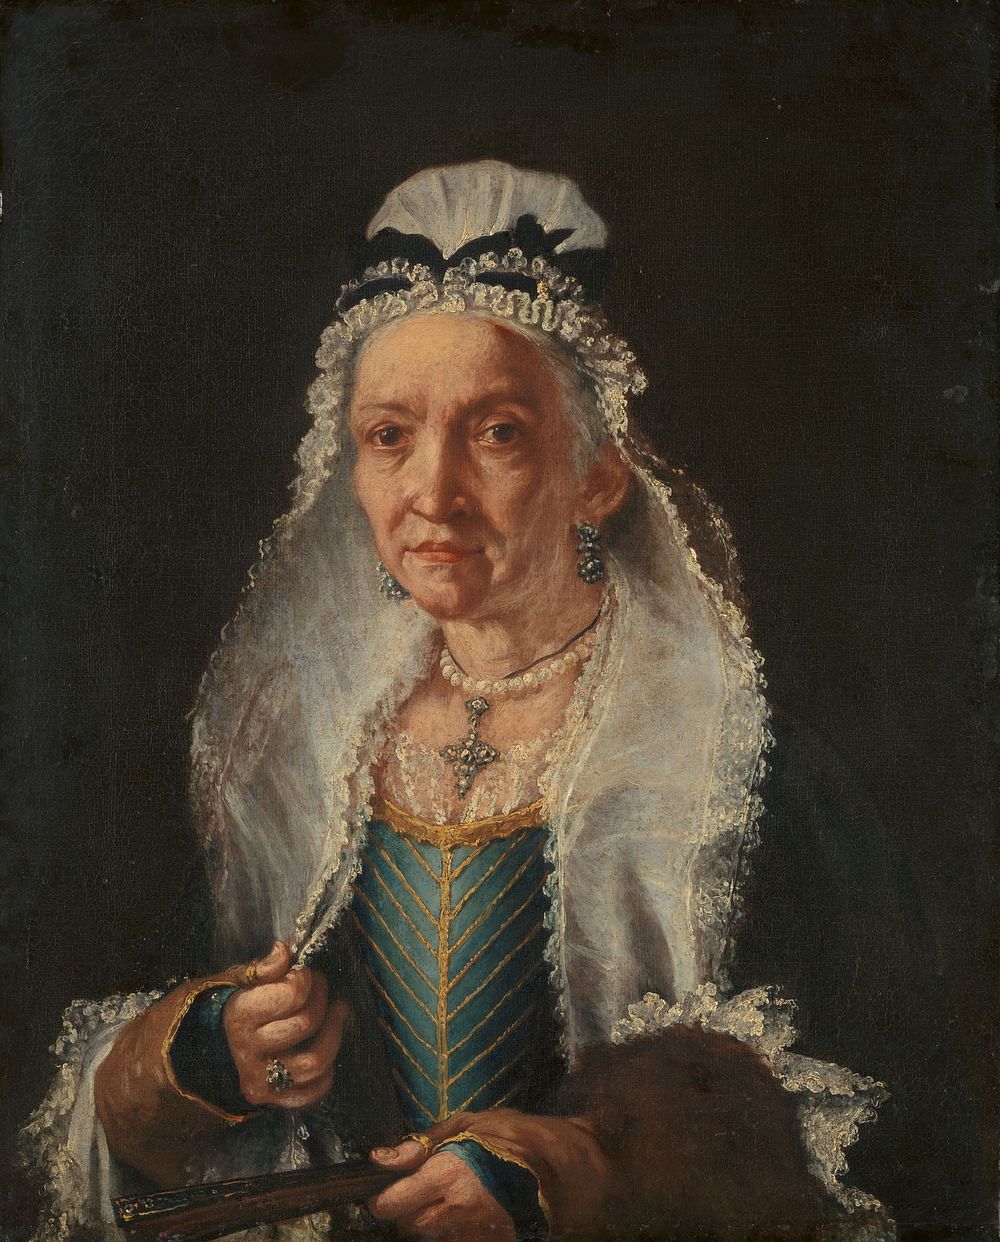 Portrait of an Old Lady (1720 - 1750) by Vittore Ghislandi and Giacomo Ceruti